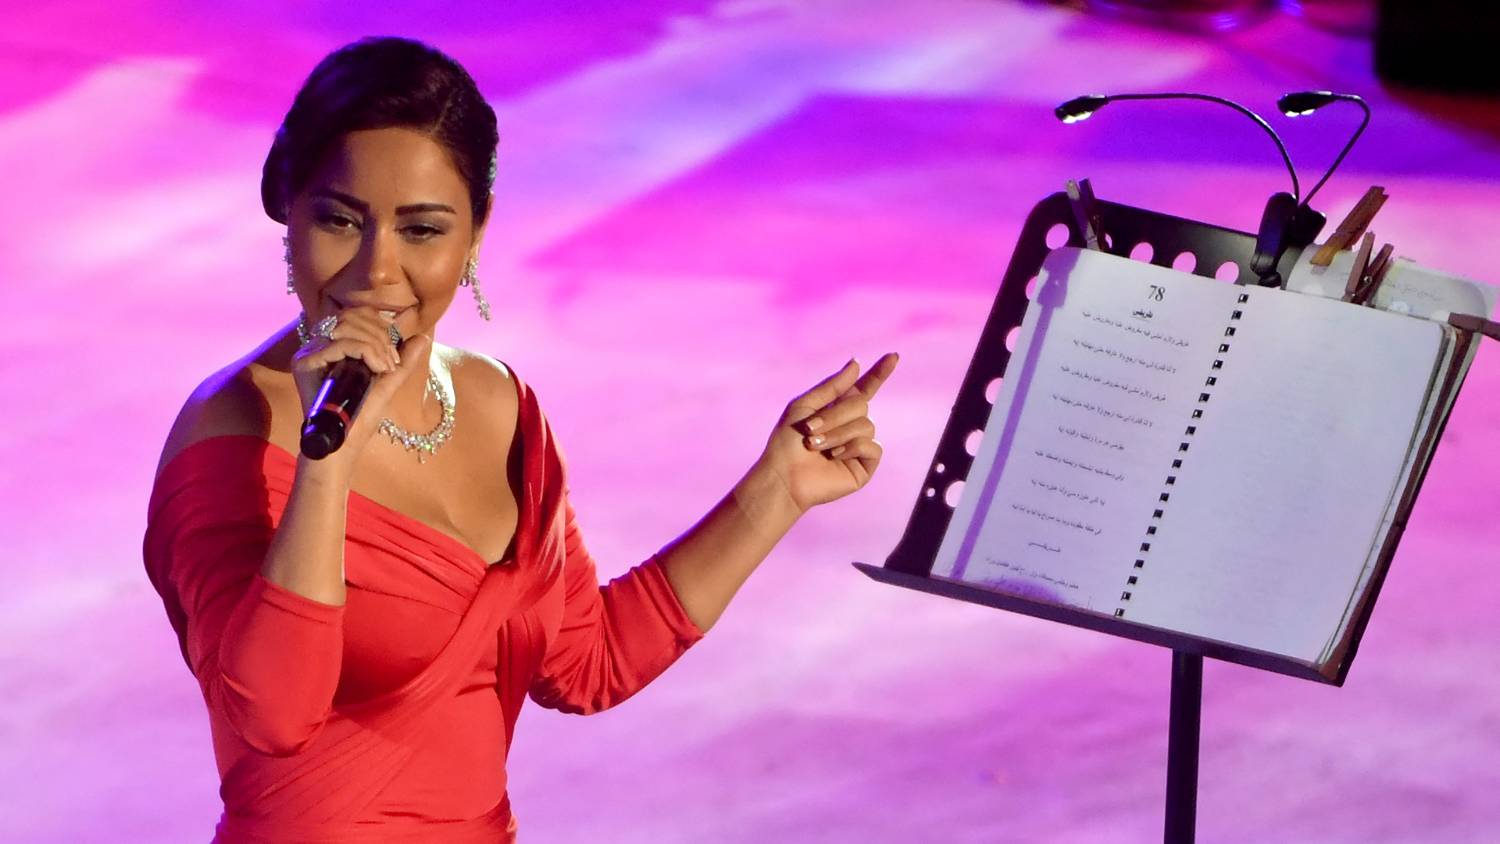 Sherine faced jail in 2019 for joking about the lack of freedom of speech in Egypt during a concert in Bahrain (AFP)